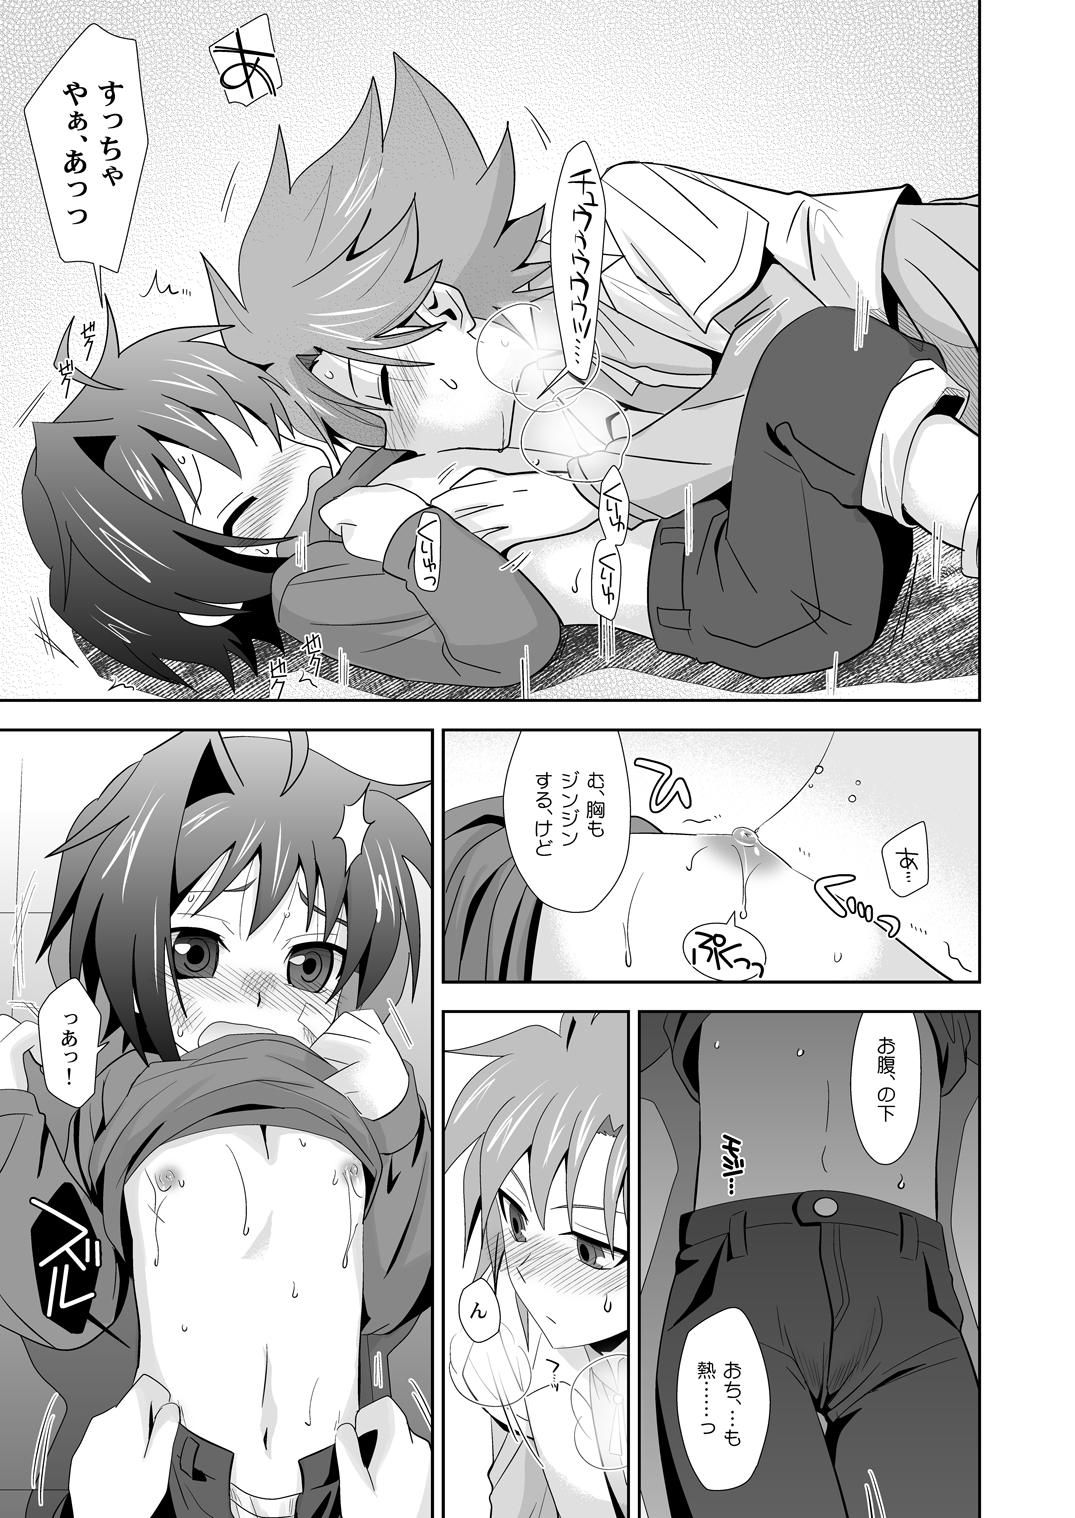 Seduction Yuuyake to Coppepan - Cardfight vanguard Private Sex - Page 10